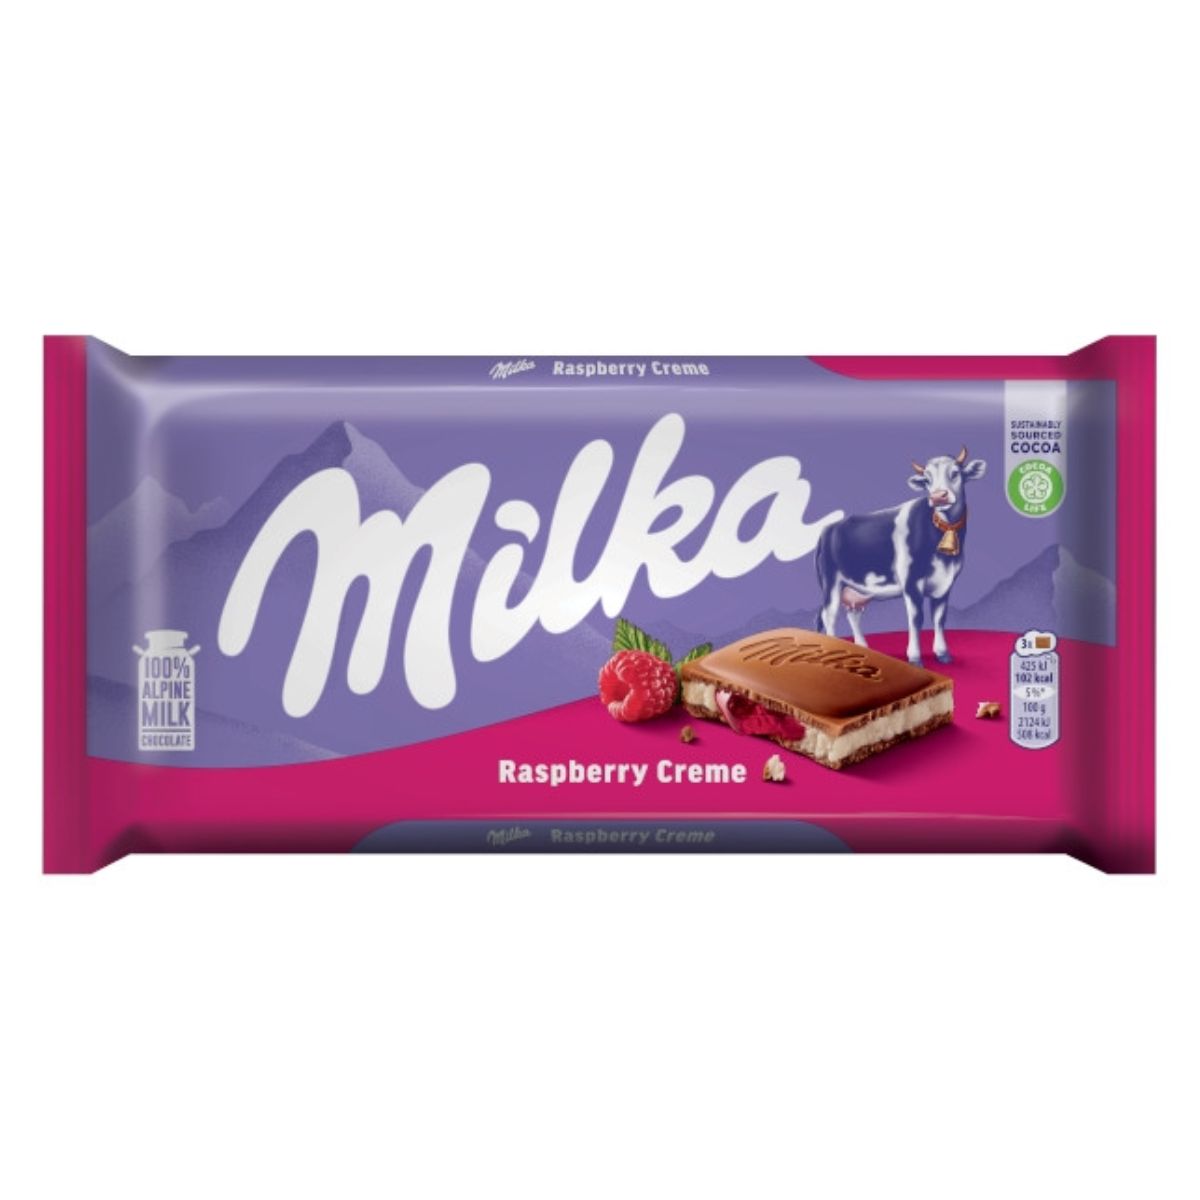 A package of Milka - Raspberry Creme - 100g chocolate bar with an illustration of the product and a raspberry on the front.